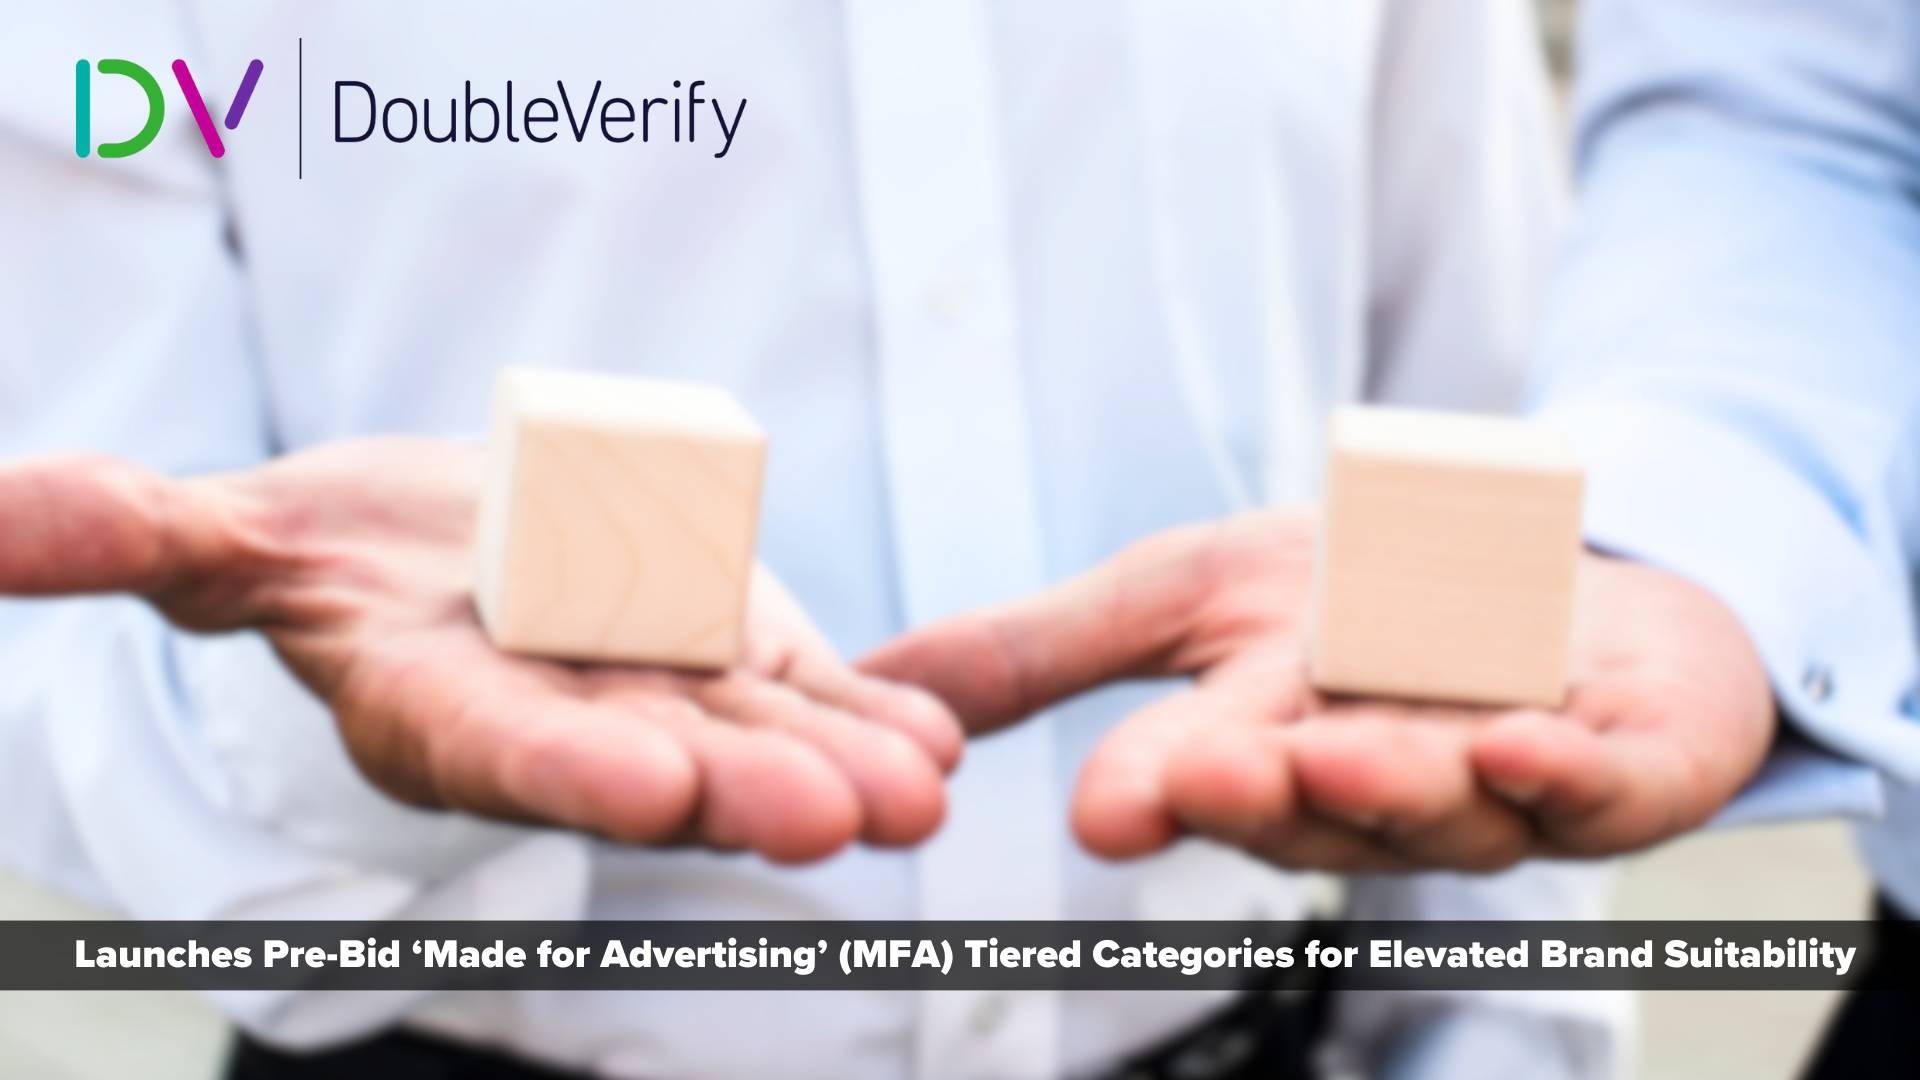 DoubleVerify Launches Pre-Bid ‘Made for Advertising’ (MFA) Tiered Categories for Elevated Brand Suitability